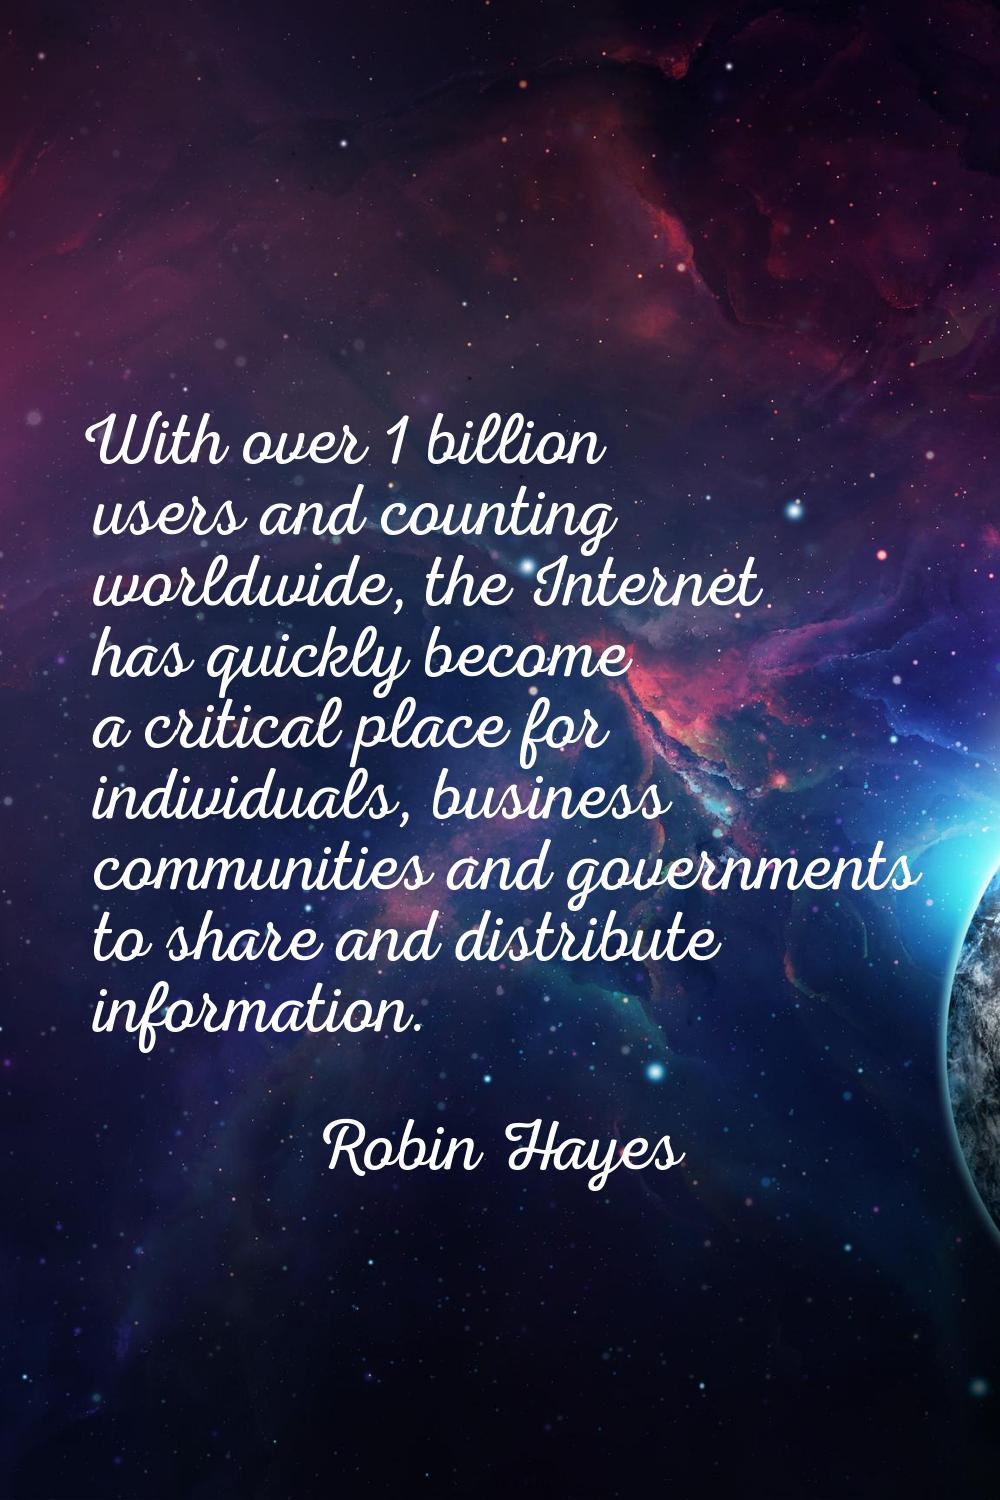 With over 1 billion users and counting worldwide, the Internet has quickly become a critical place 